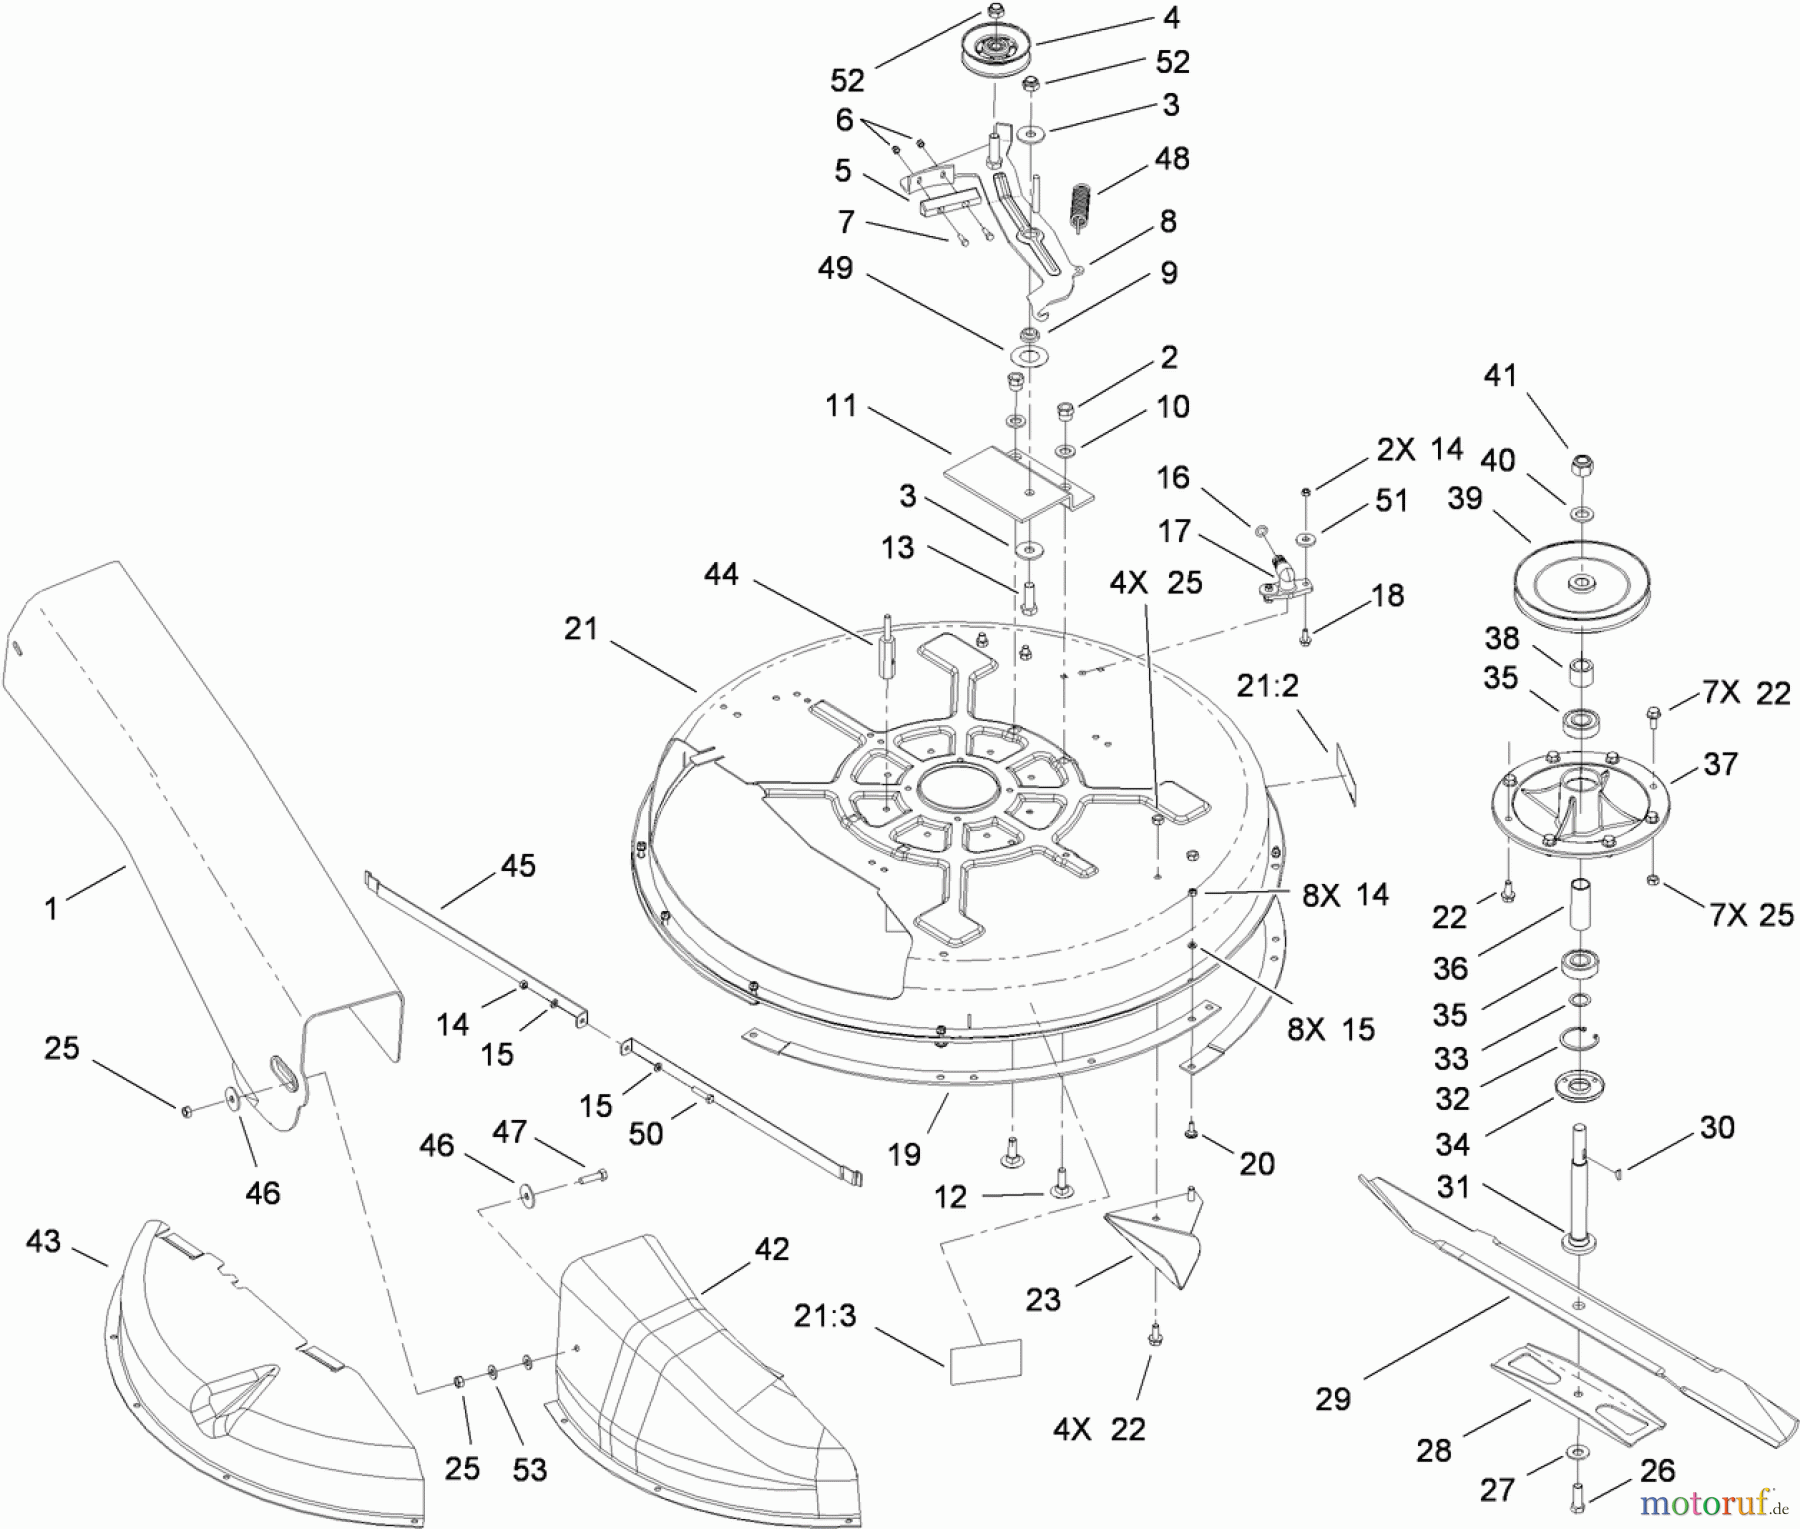  Toro Neu Mowers, Rear-Engine Rider 70186 (H132) - Toro H132 Rear-Engine Riding Mower, 2010 (310000001-310999999) DECK AND SPINDLE ASSEMBLY